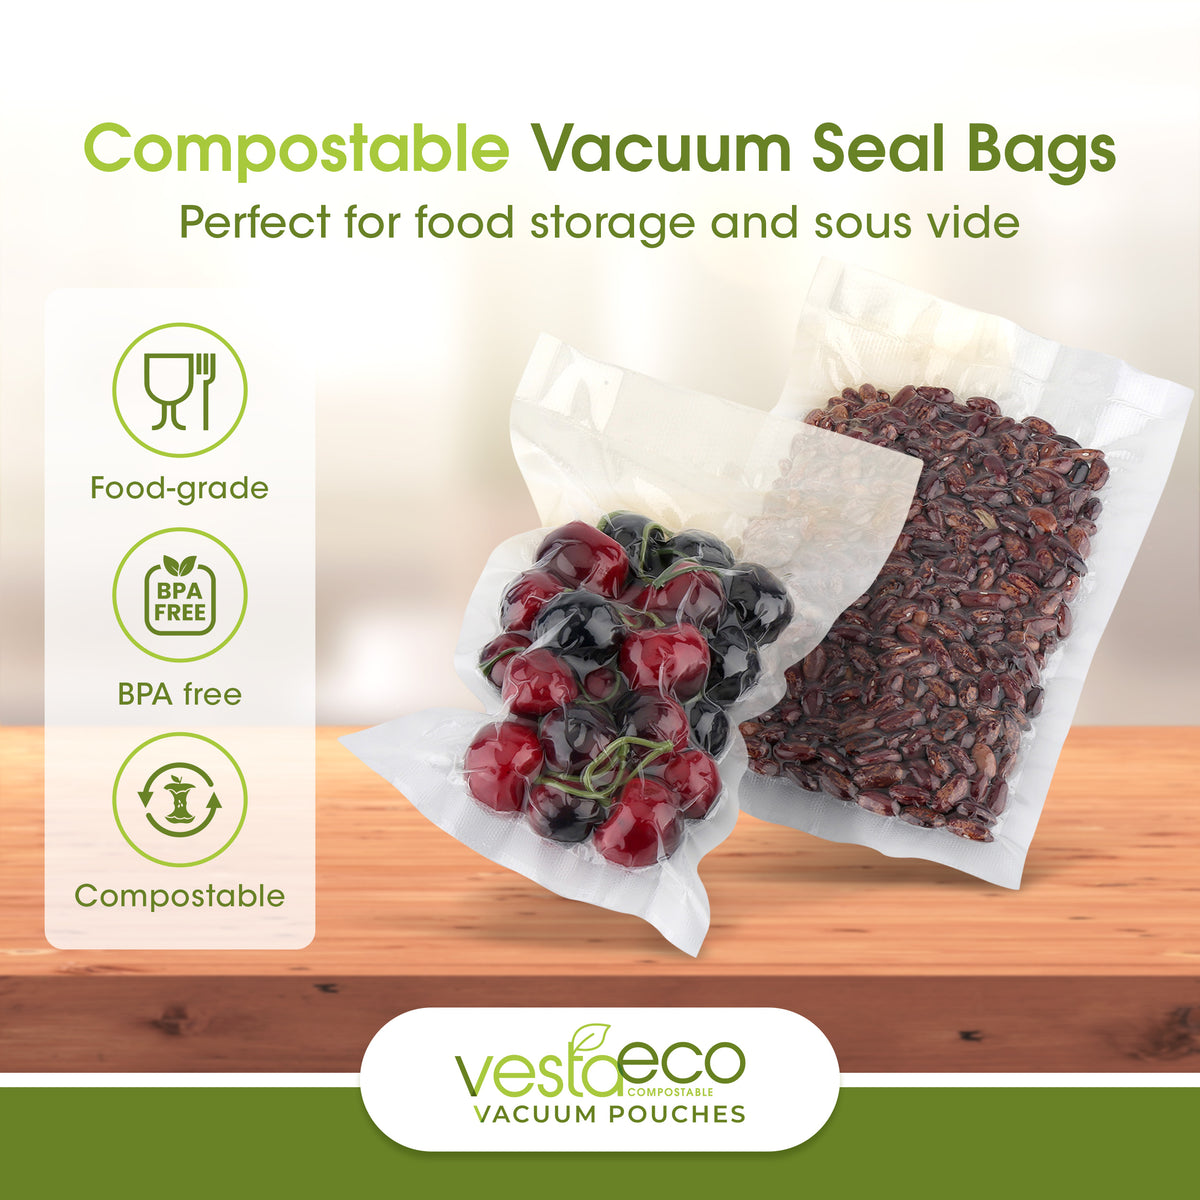 An infographic stating VestaEco certified commercially compostable embossed vacuum seal bags are food-grade, BPA-free, and compostable.